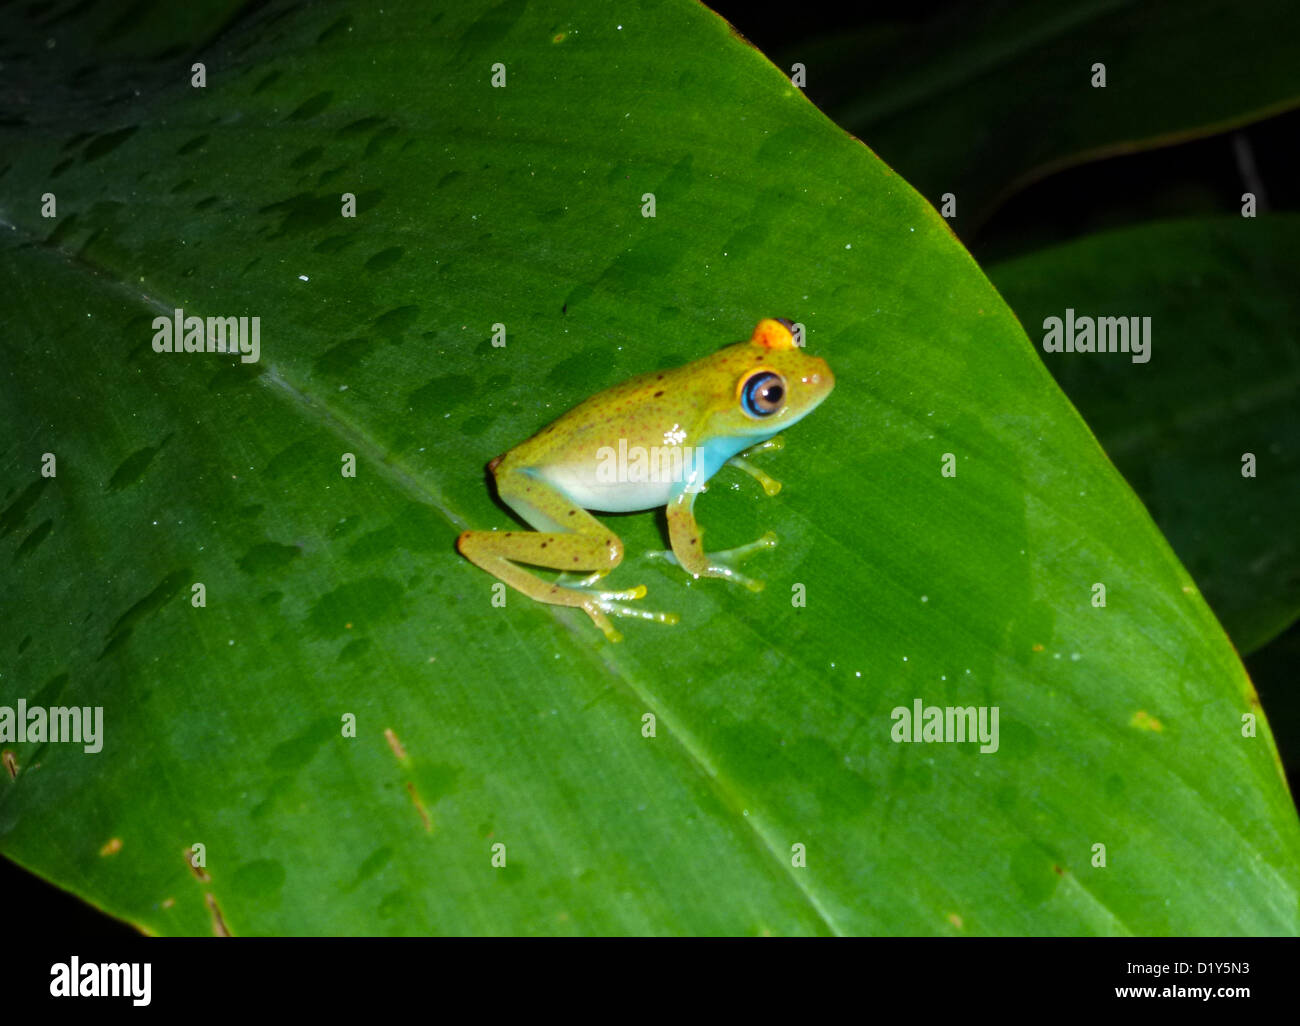 A Green bright-eyed frog Stock Photo